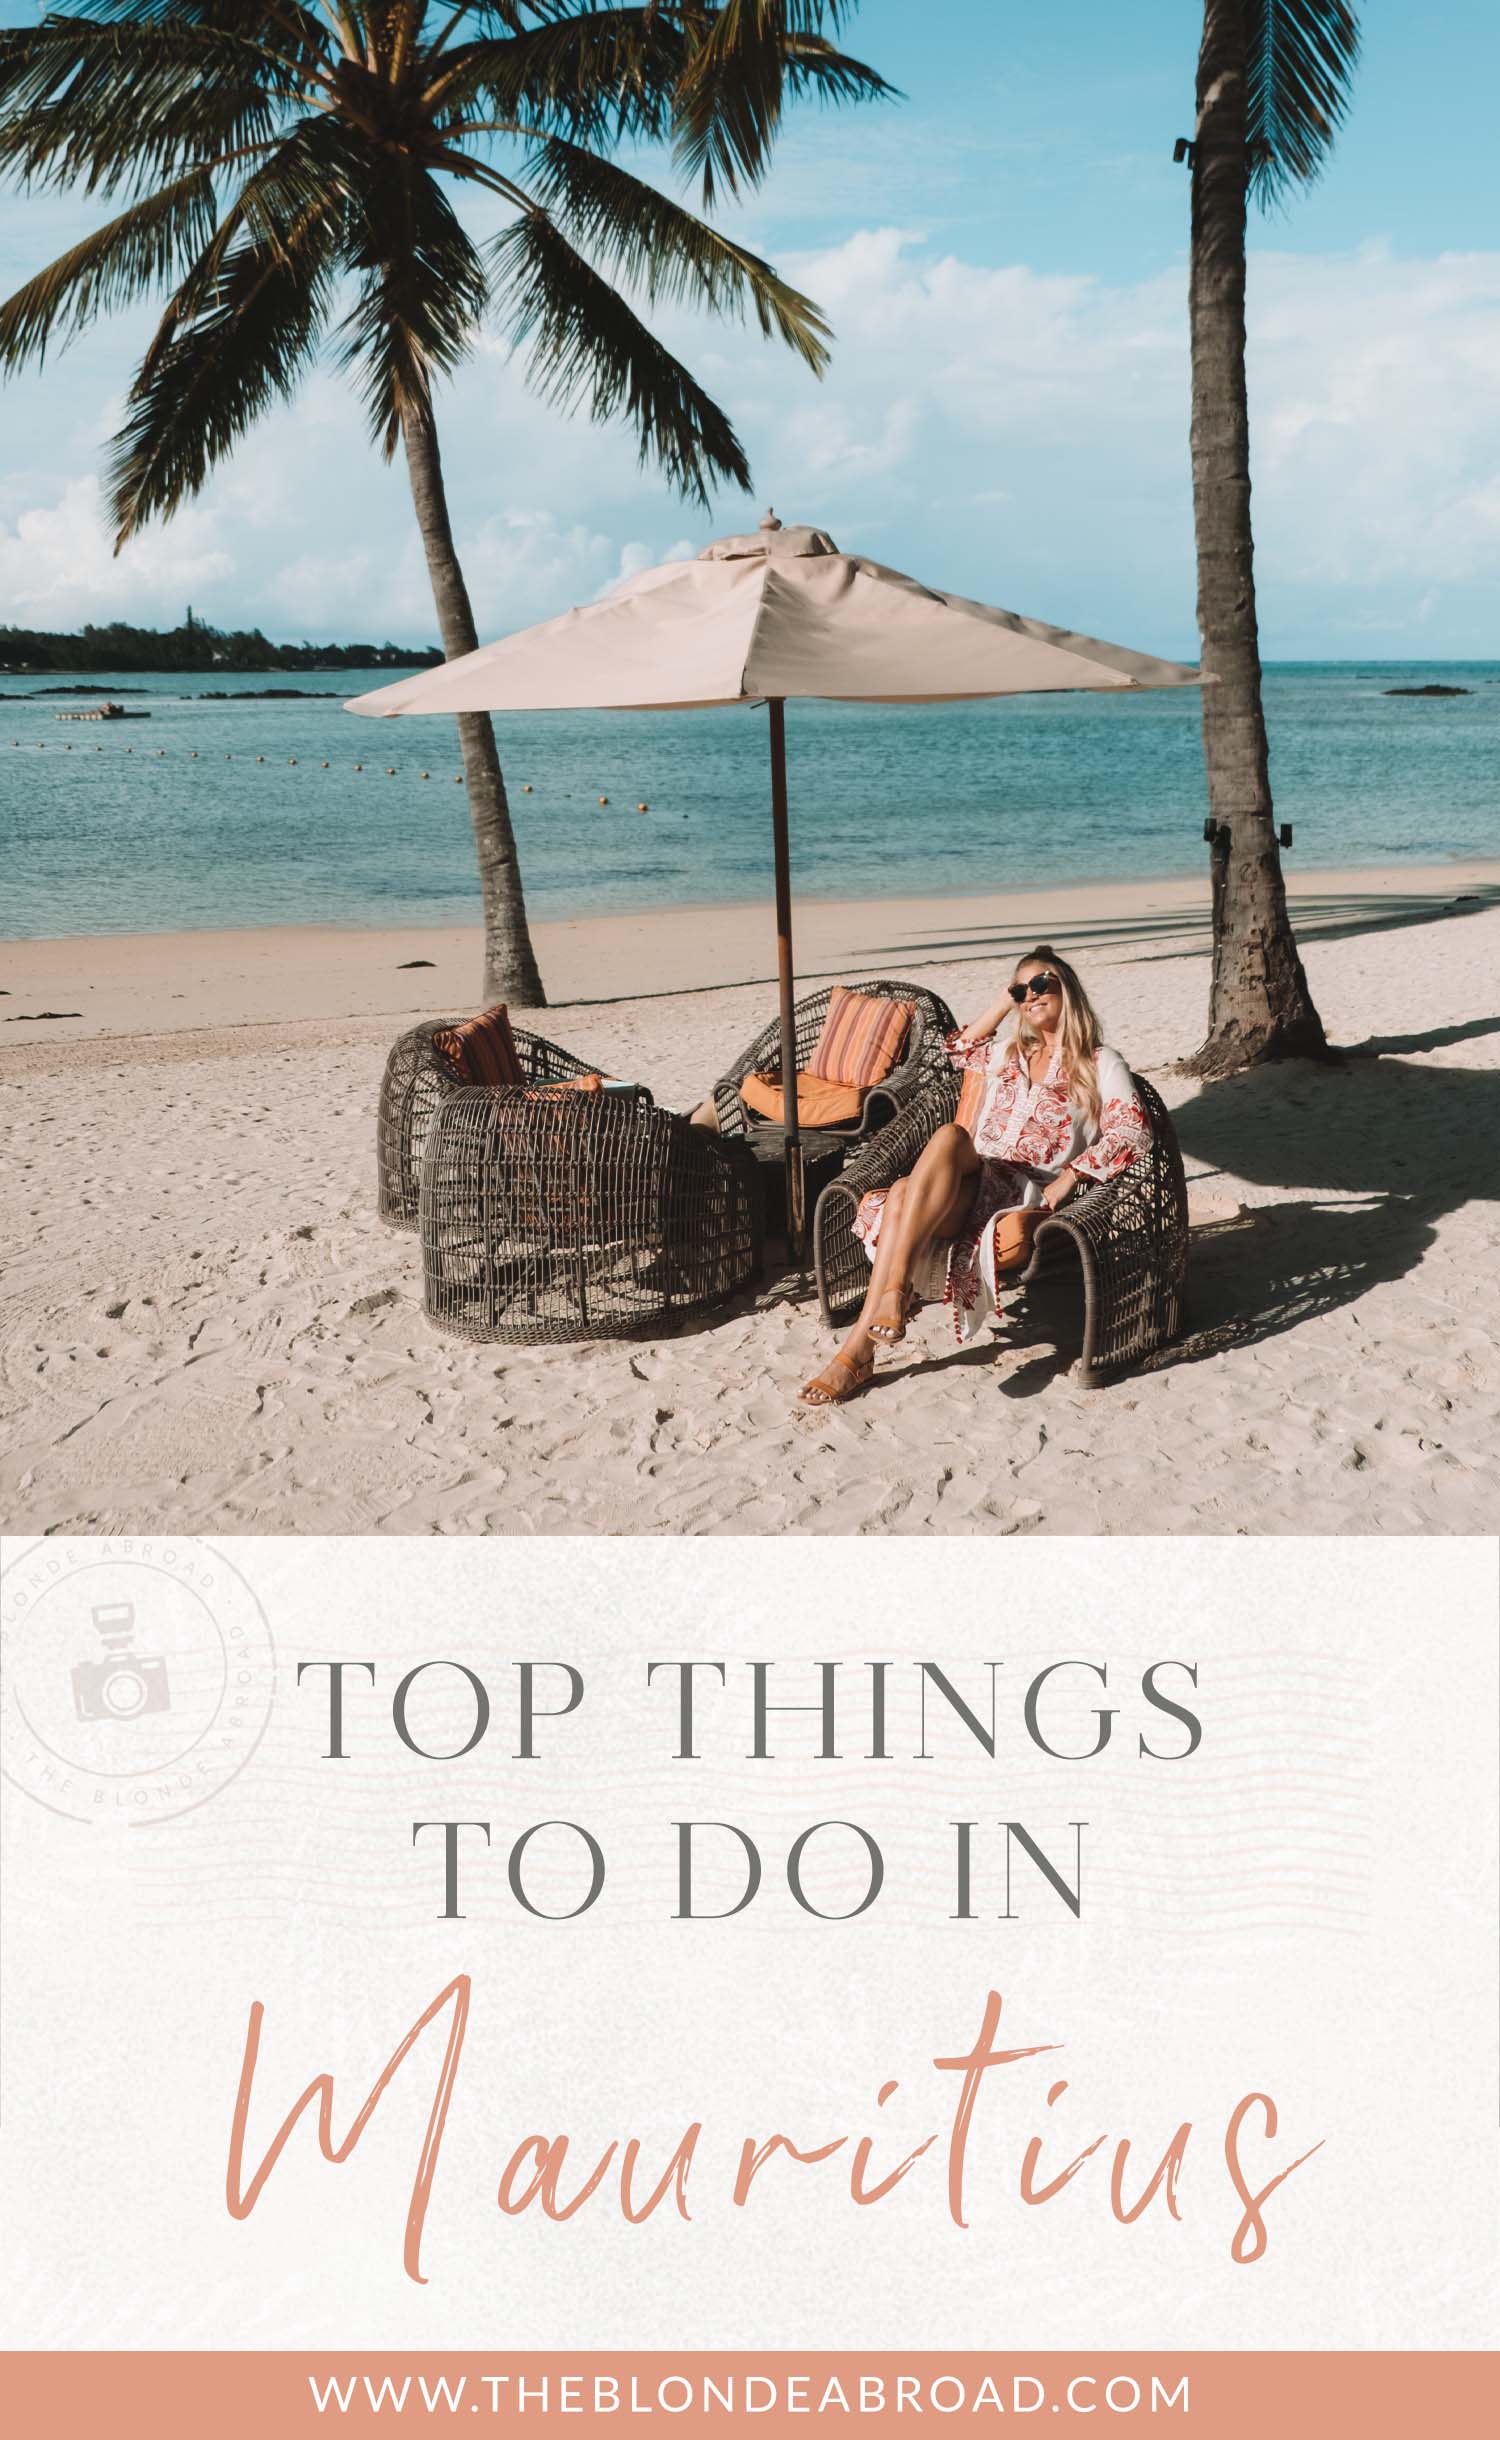 Top Things to Do in Mauritius